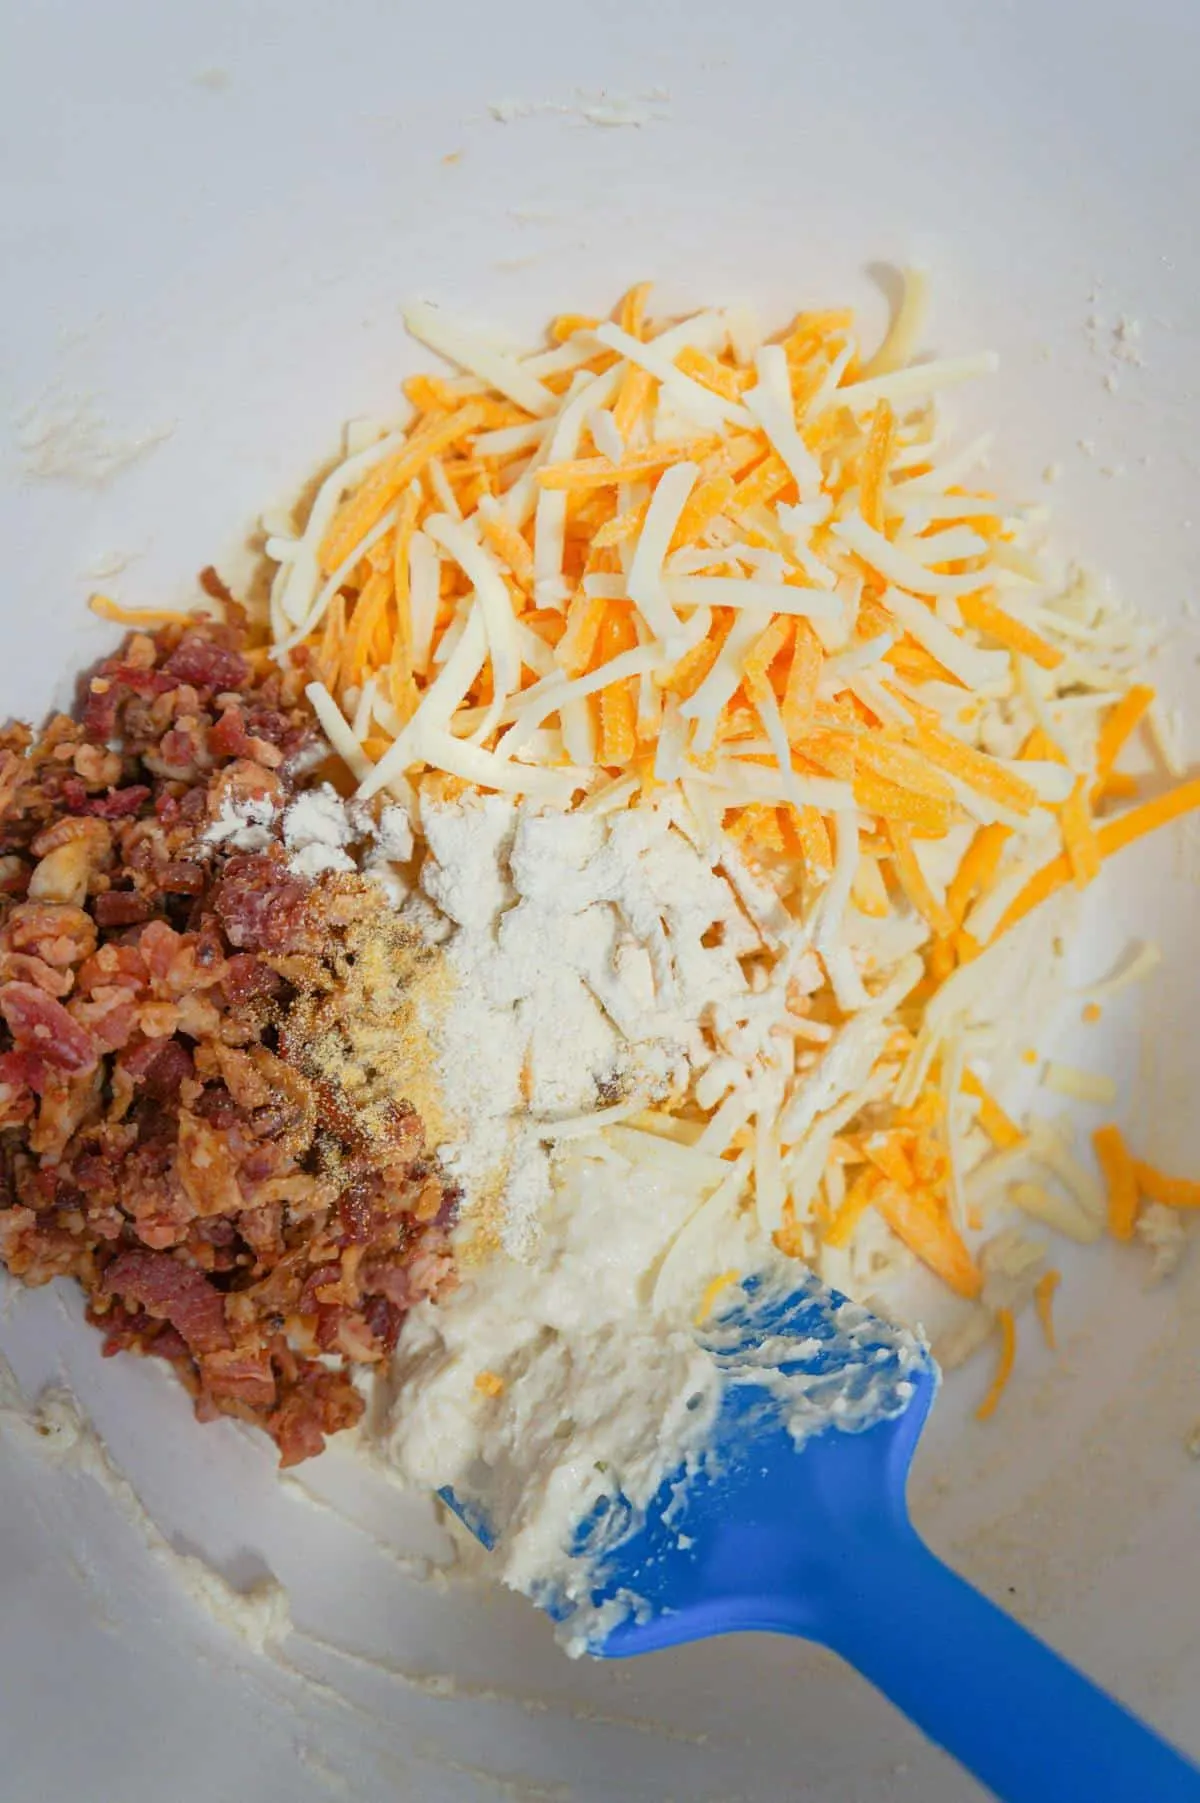 shredded cheese, crumbled bacon and spices on top of biscuit dough in a mixing bowl